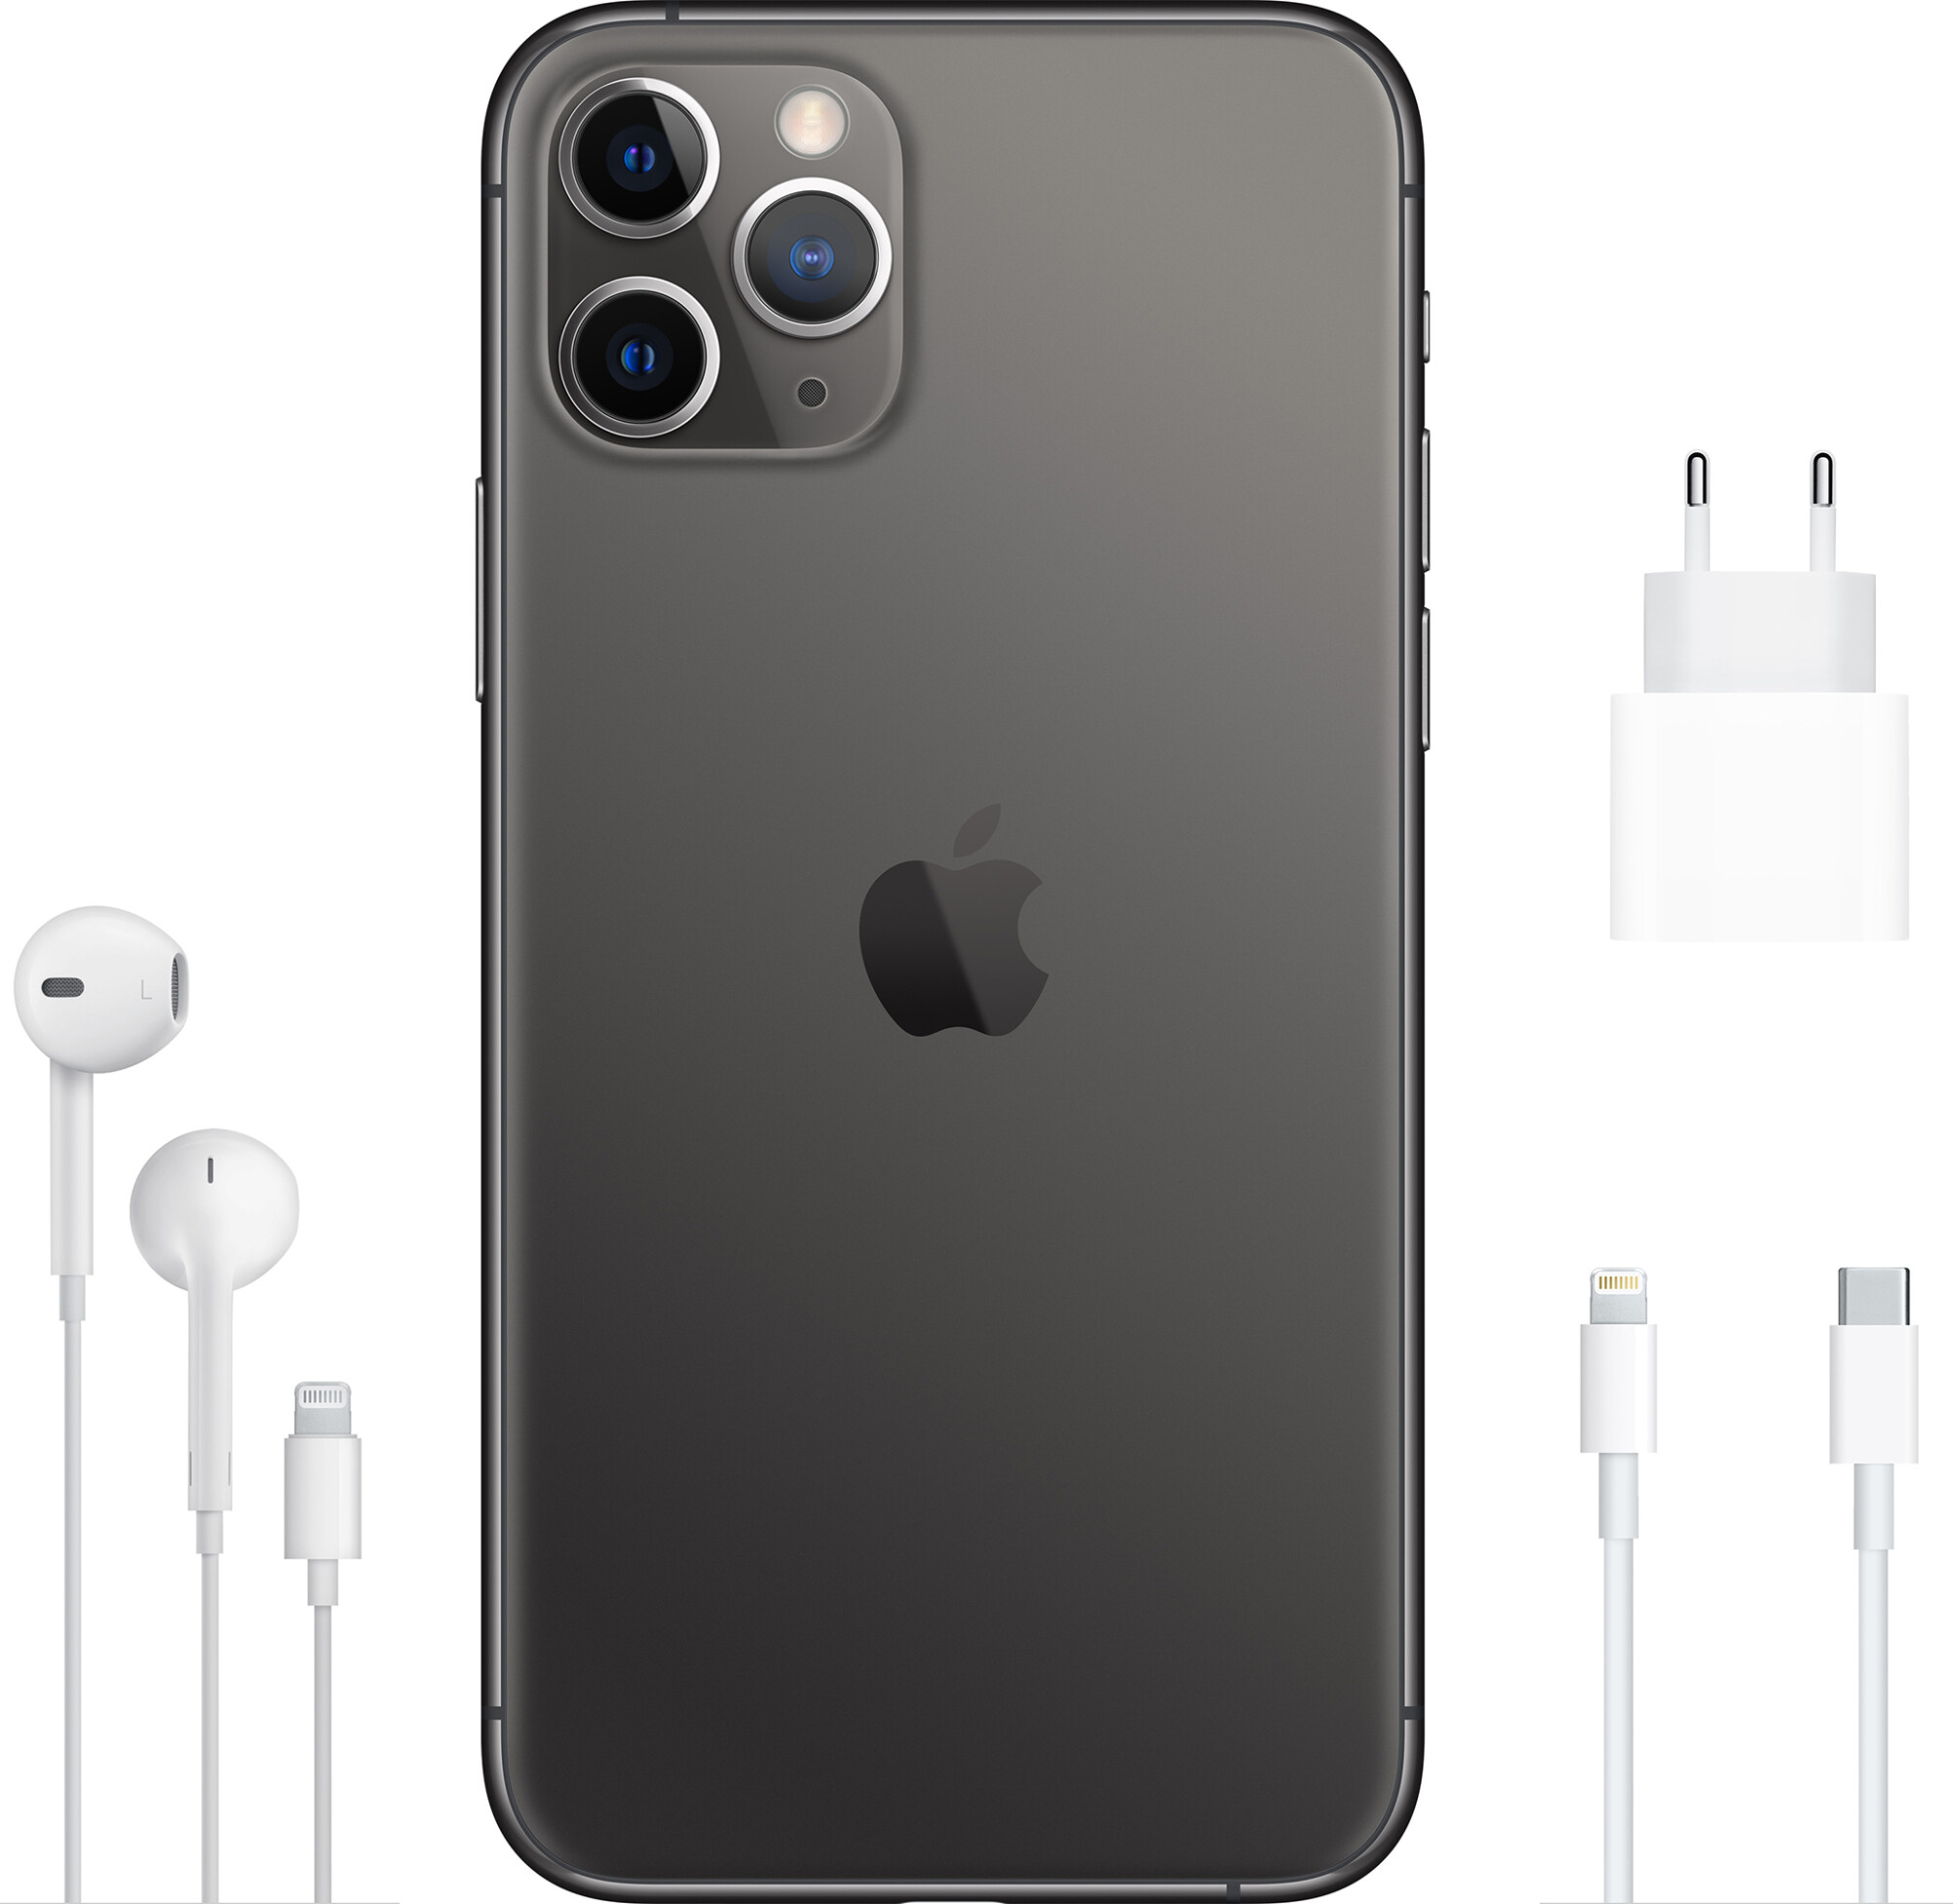  Apple iPhone 11 Pro 512GB Space Gray (MWCD2)